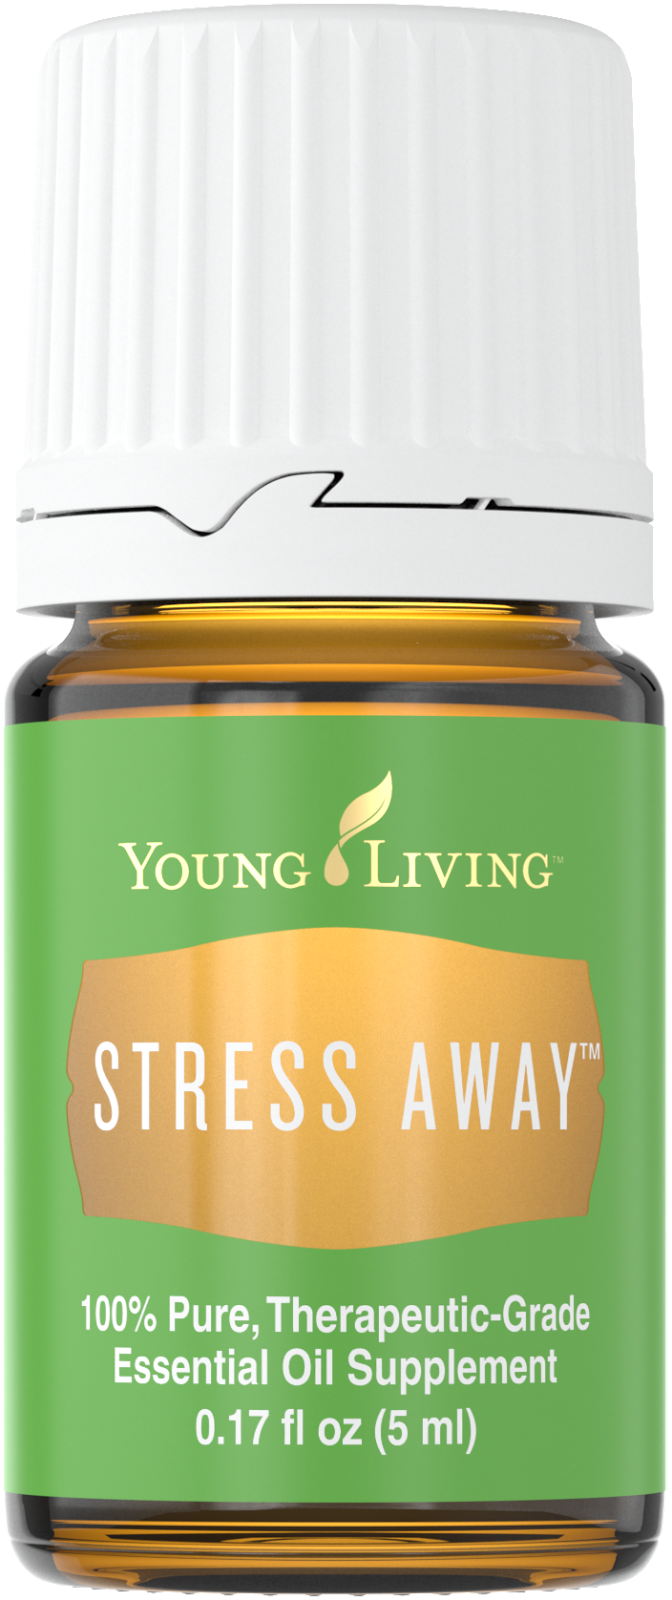 Ulei esential stress away 5ml - young living